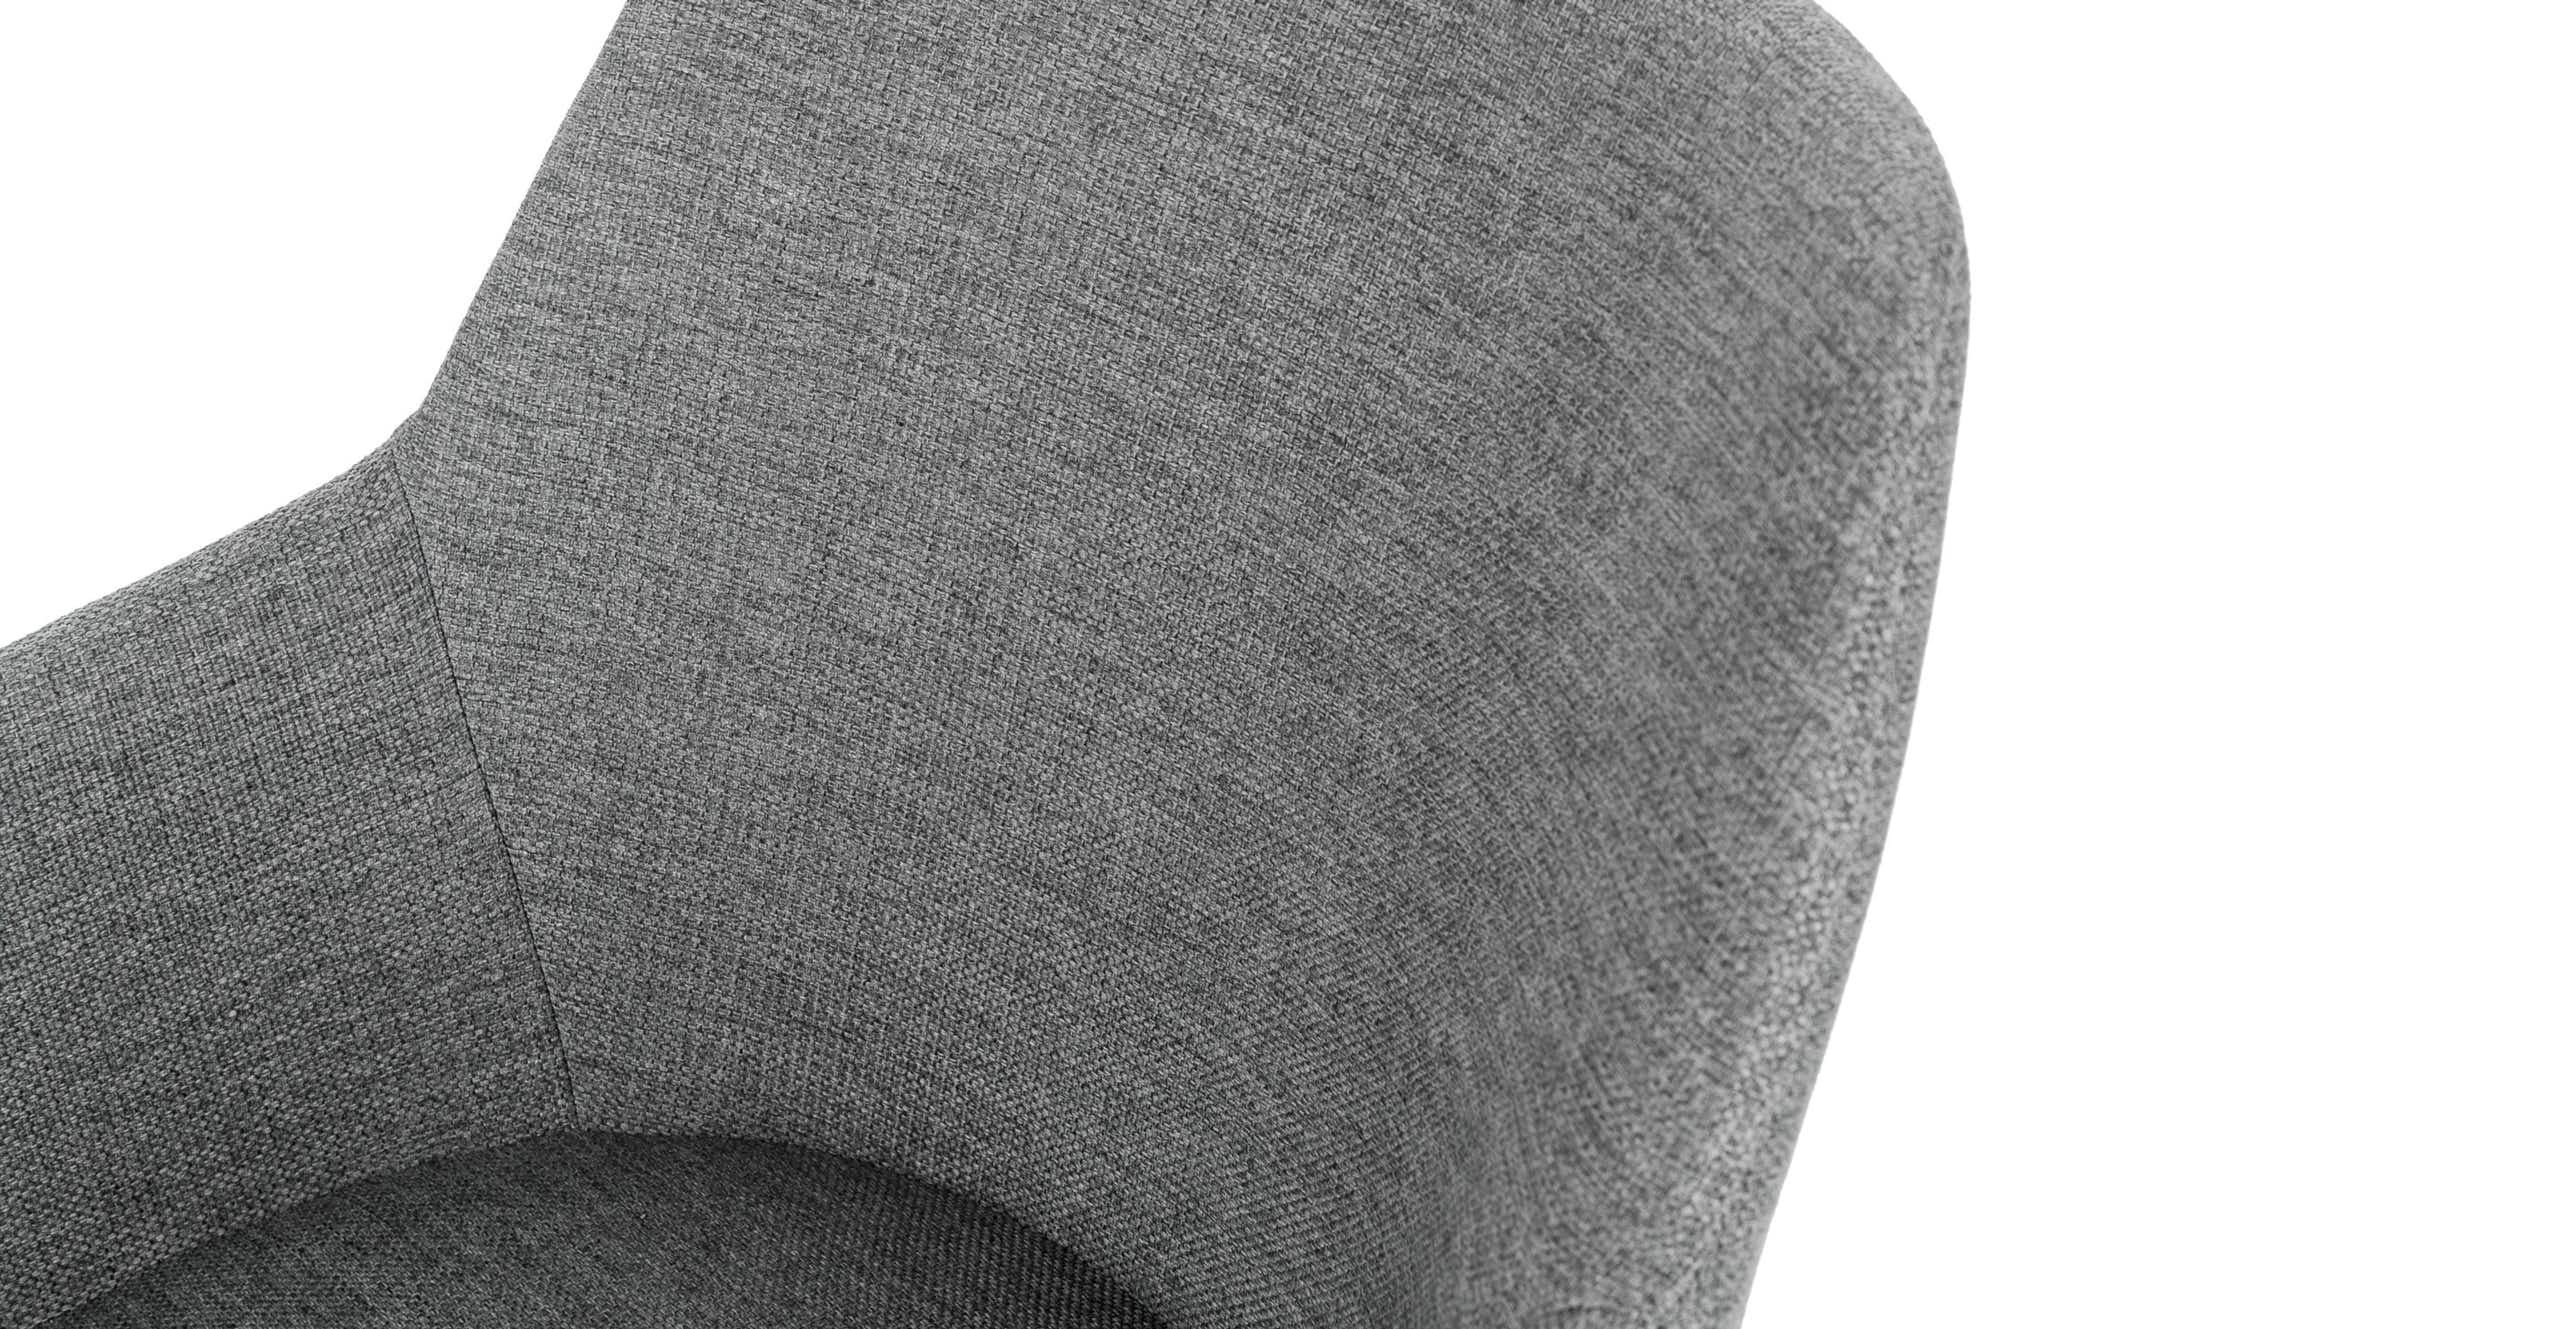 Feast Gravel Gray Dining Chair - Image 3